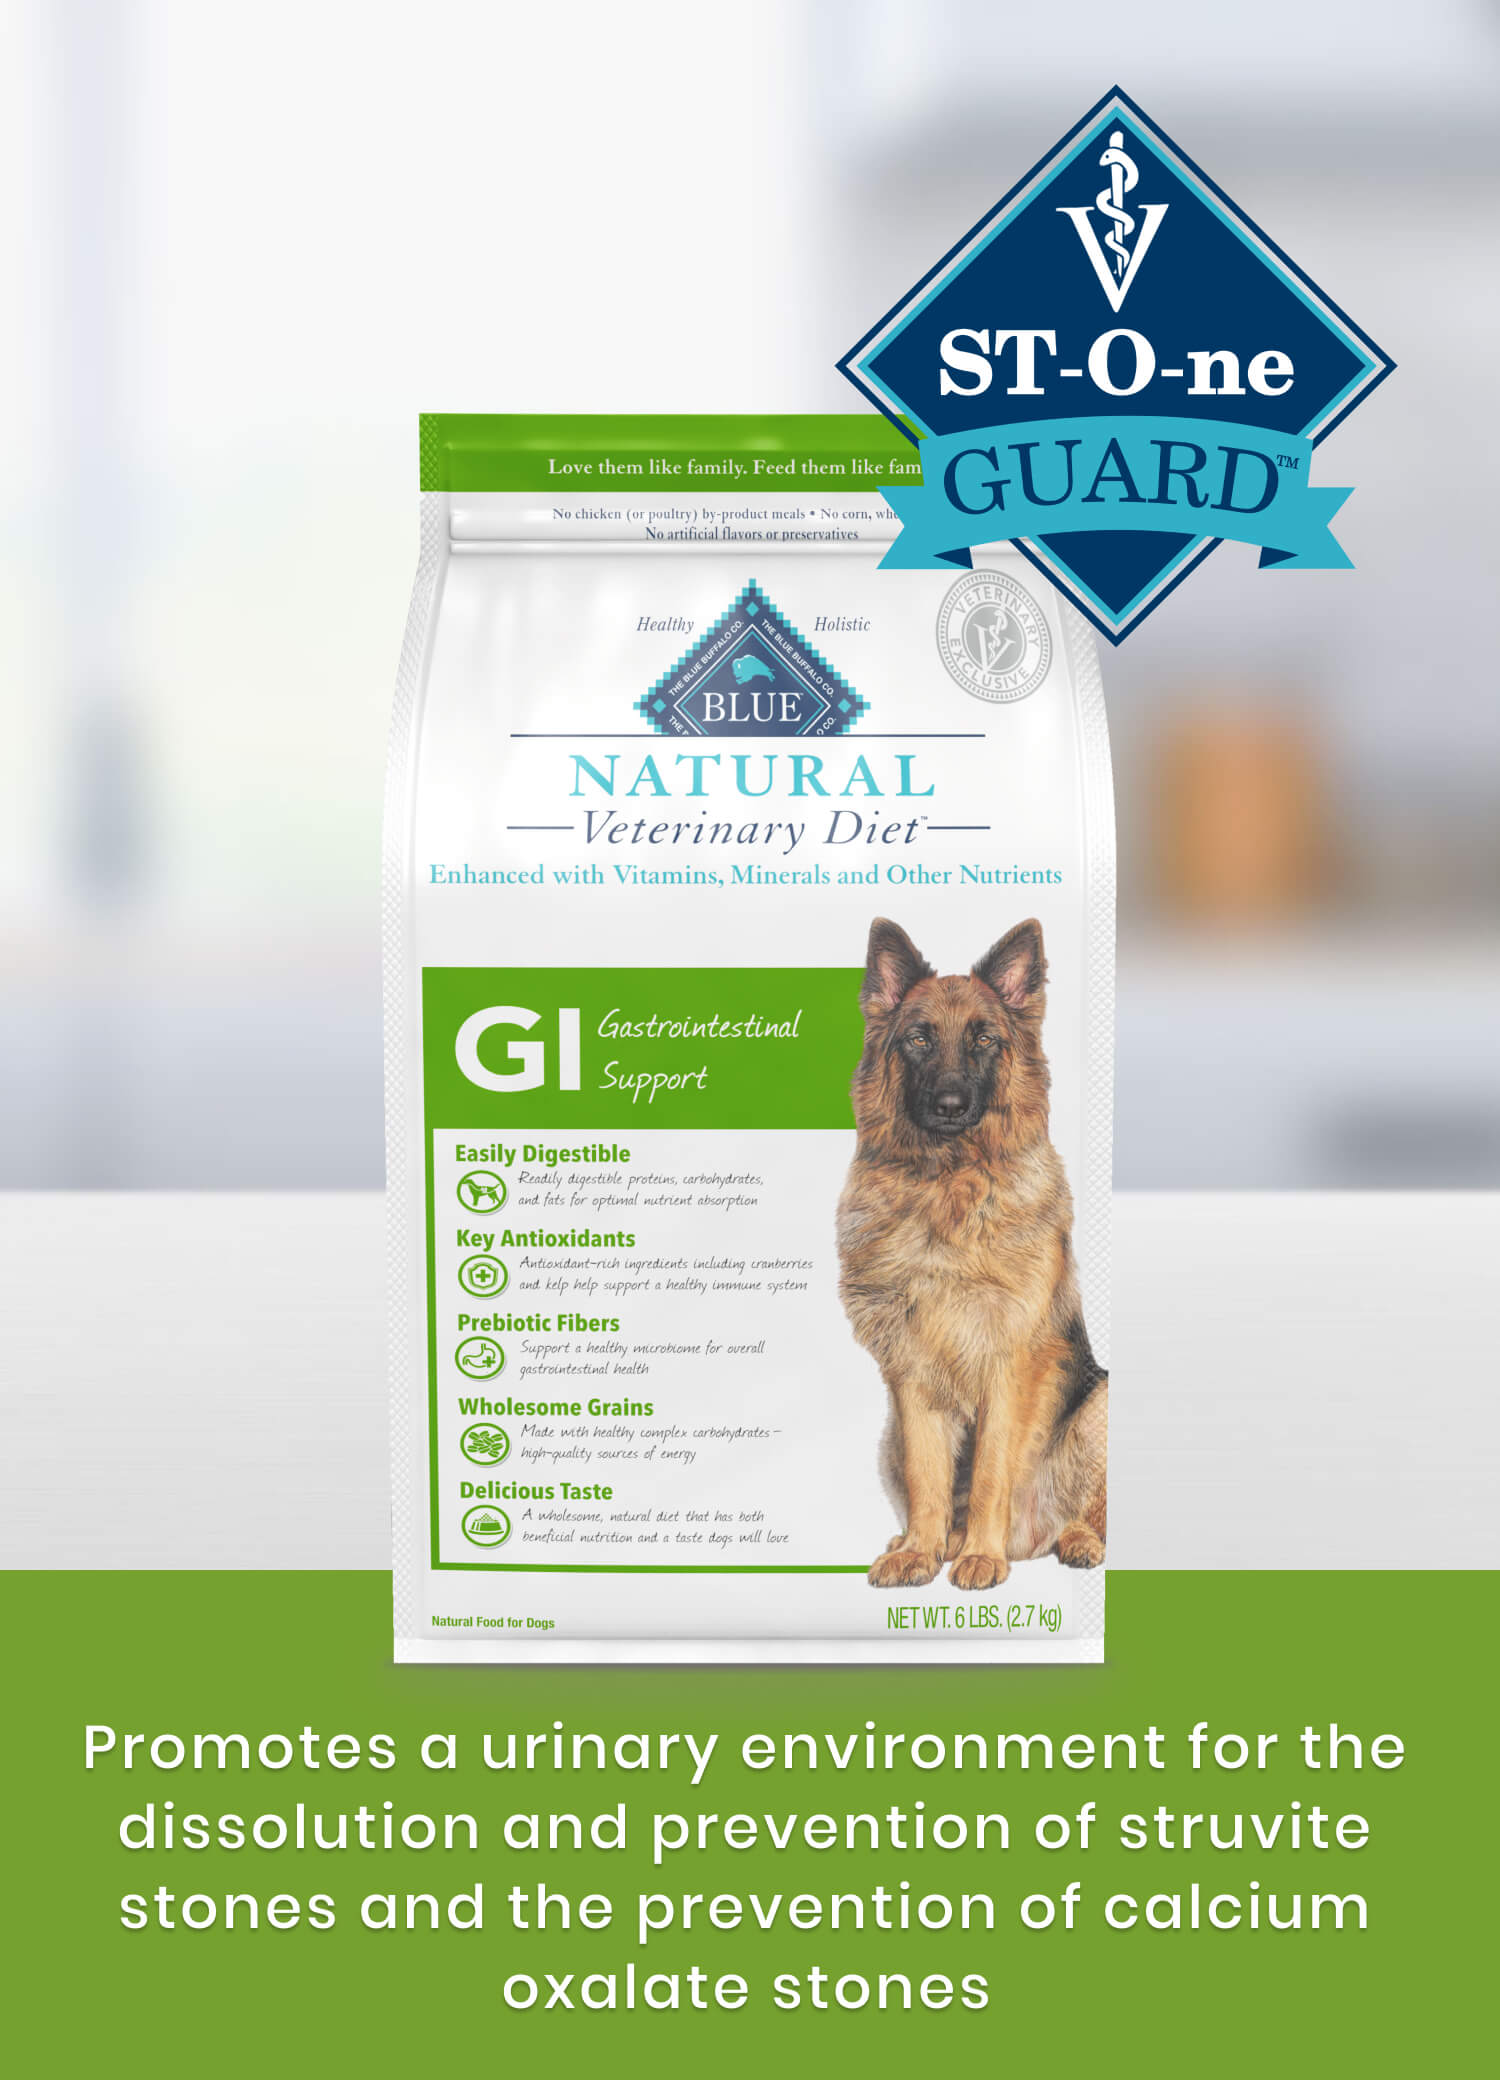 GI Gastrointestinal Support St-O-ne Guard Promotes a urinary environment for the dissolution and prevention of struvite stones and prevention of calcium oxalate stones